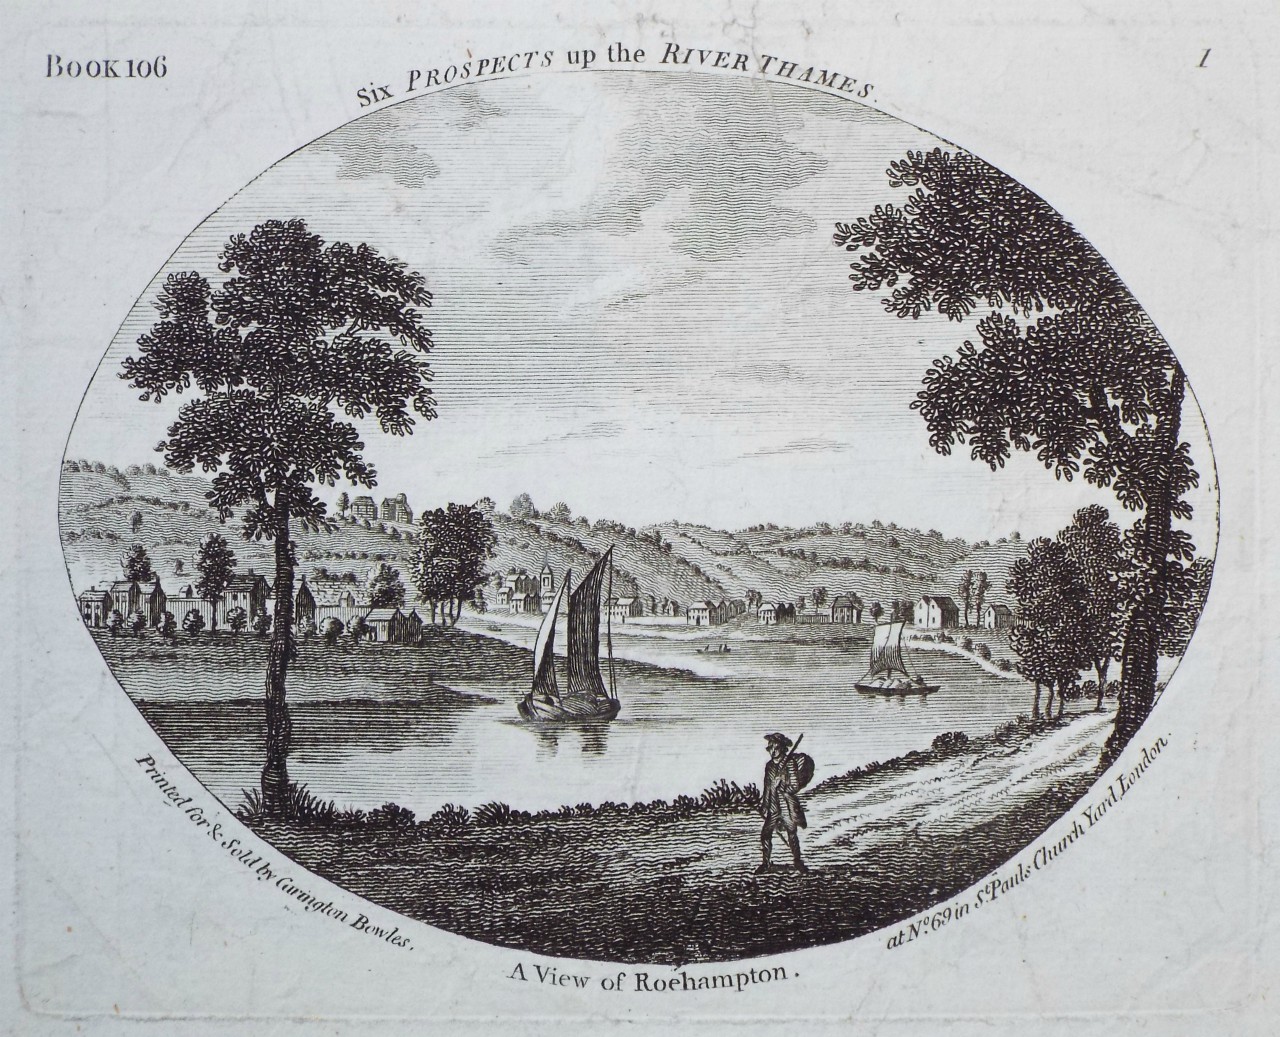 Print - Six Prospects of the River Thames 
A View of Roehampton.